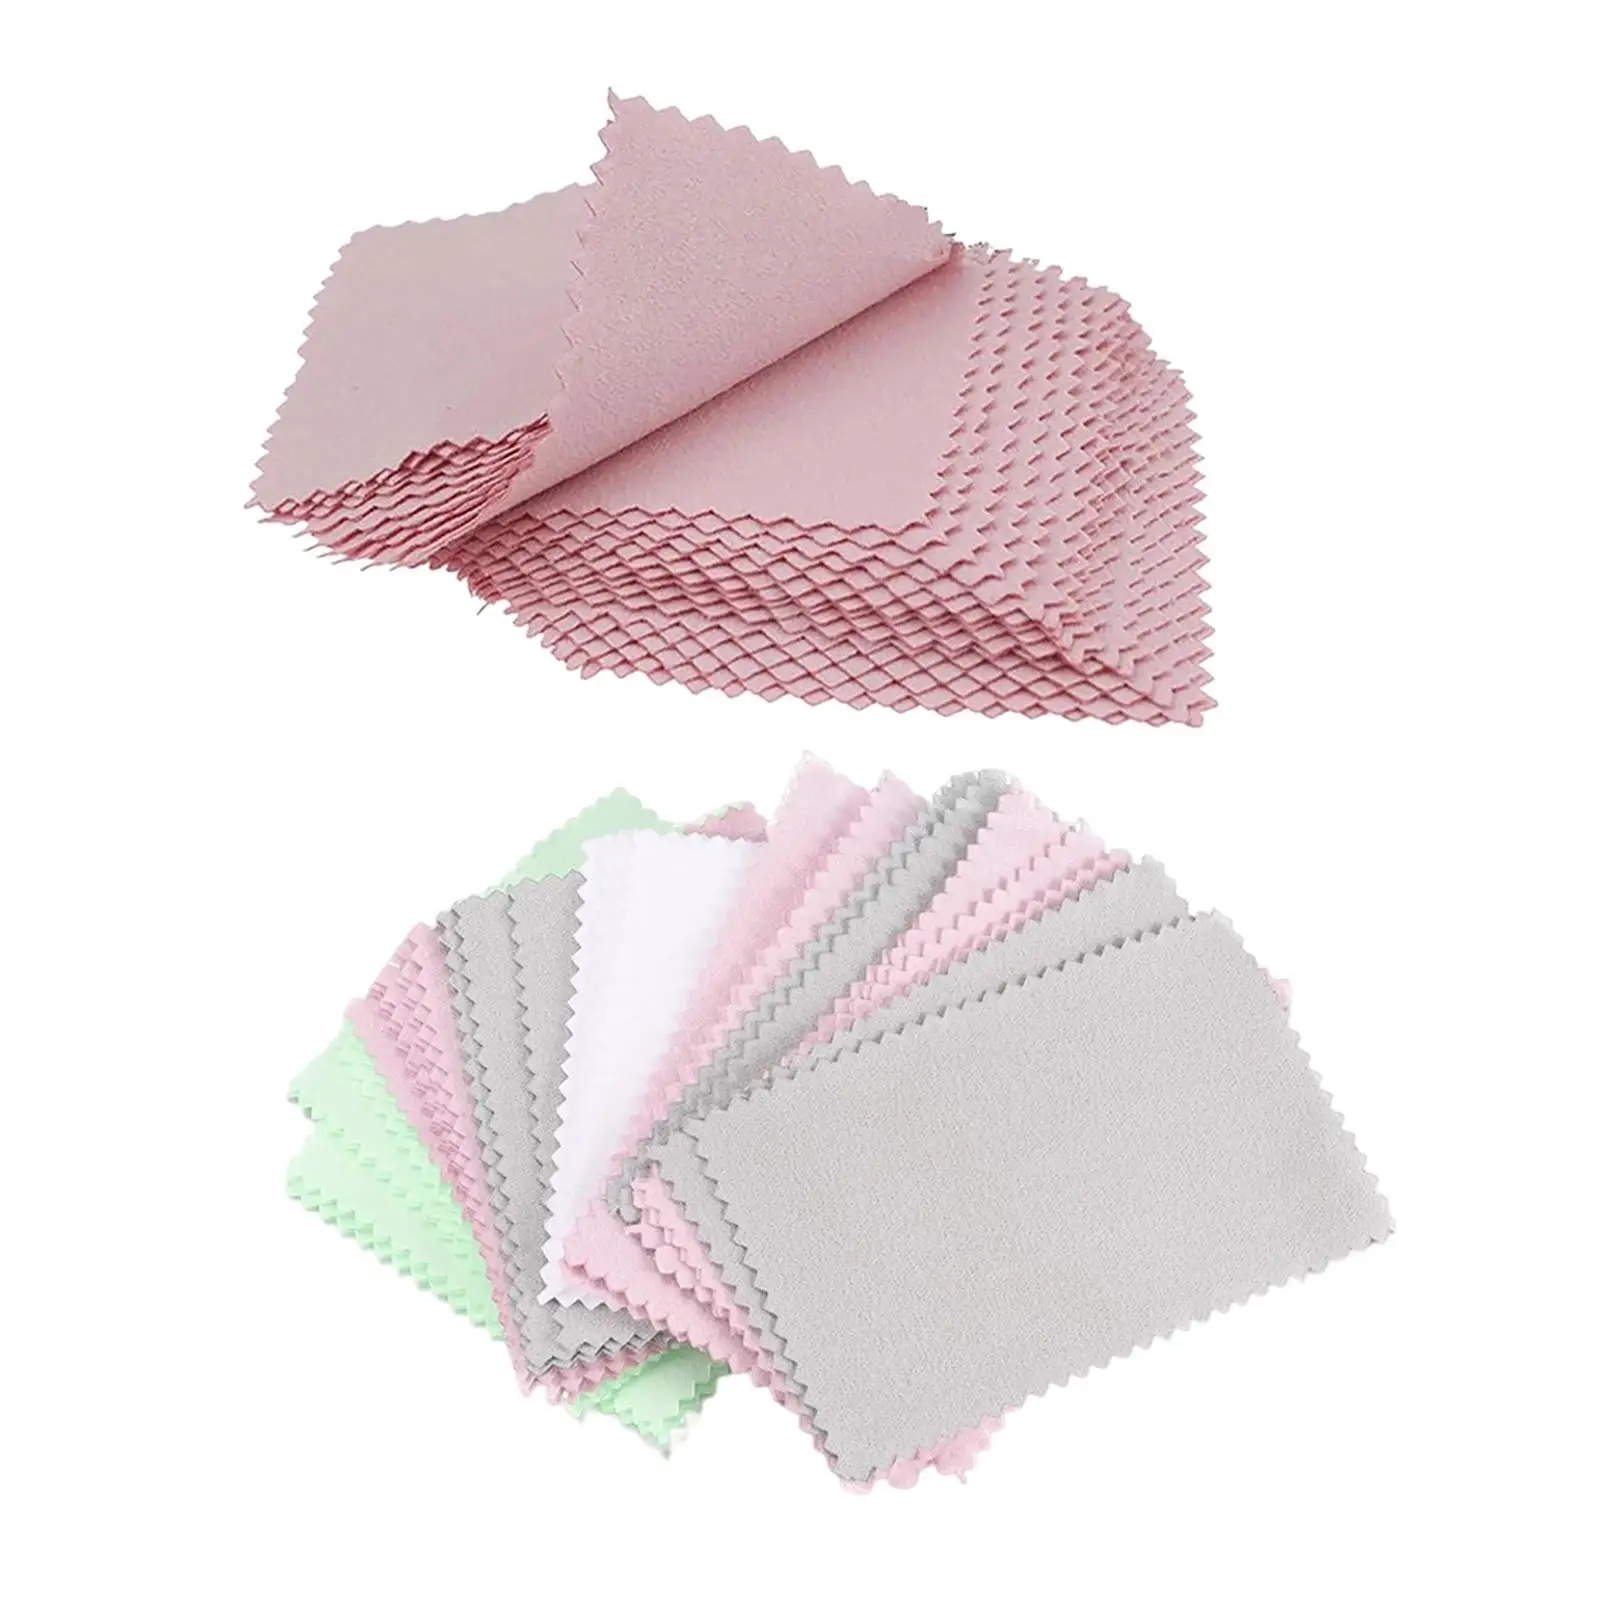 50 Pack Jewelry Cleaning Polishing Cloth 8x8cm Portable Square Maintenance Cloth Napkins for Watches Rings Lens Glasses Gold